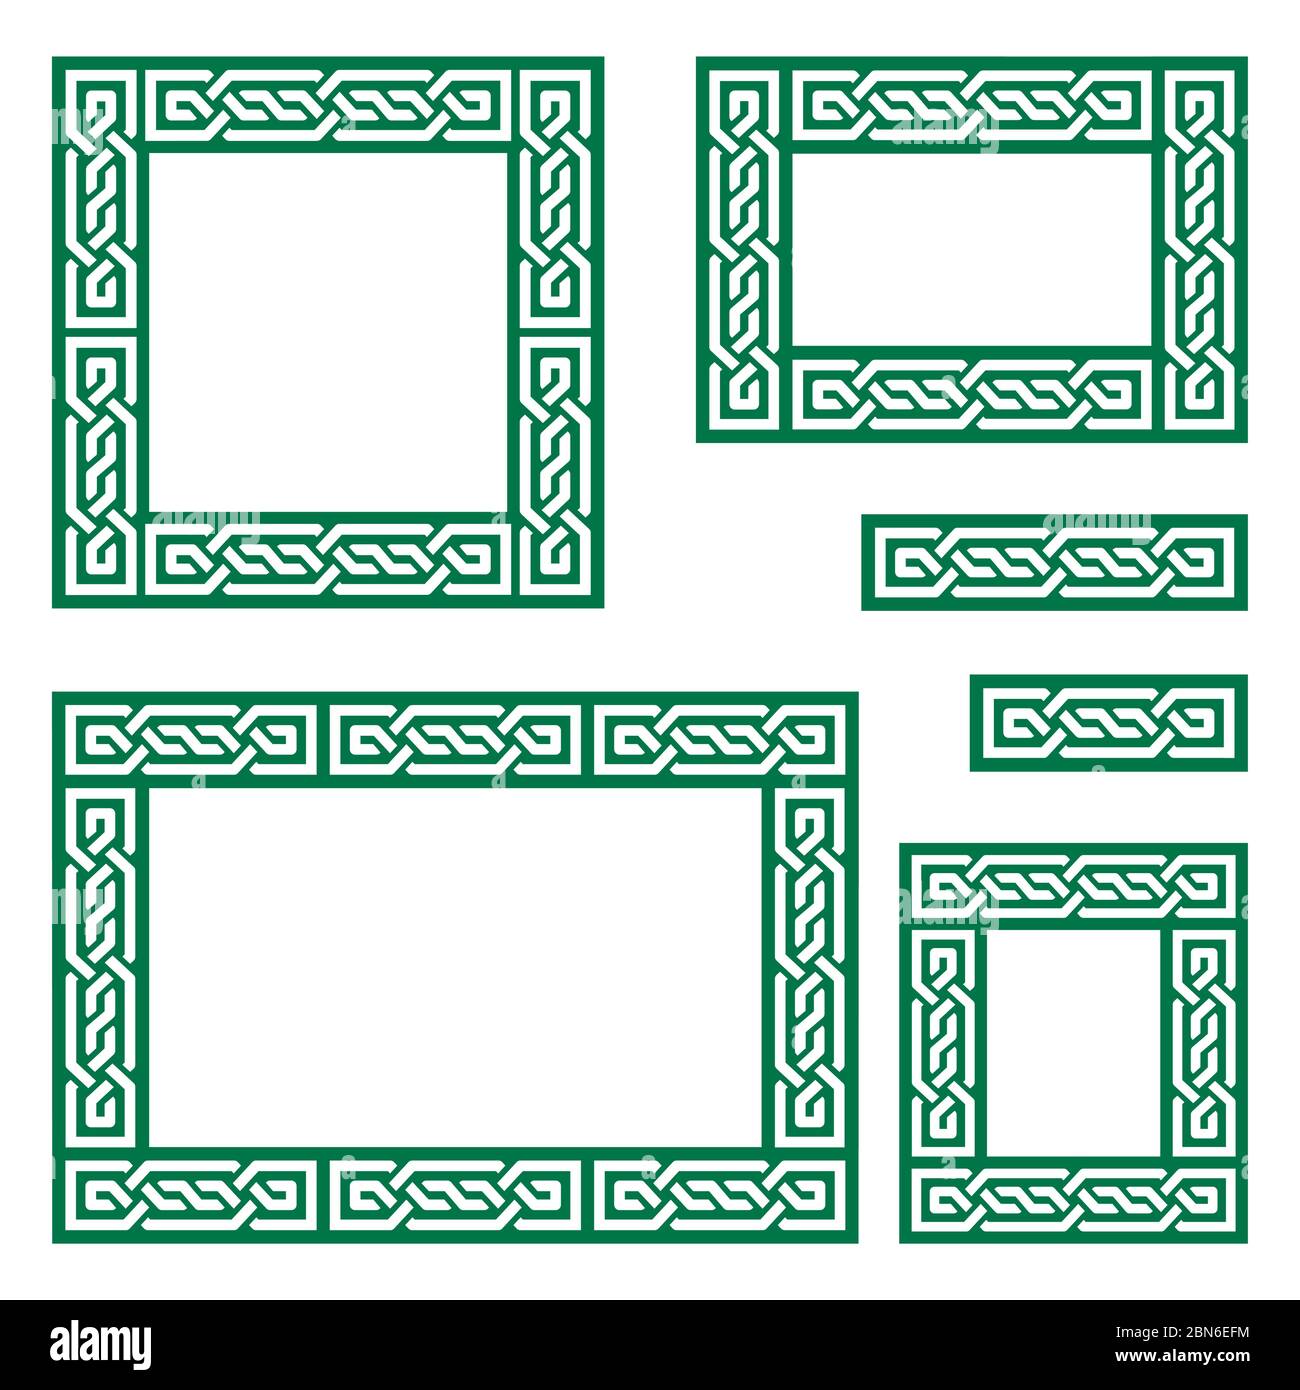 Celtic vector frame or border pattern collection square and rectangle shapes - green Irish knots, braided design perfect for greeting card, wedding in Stock Vector